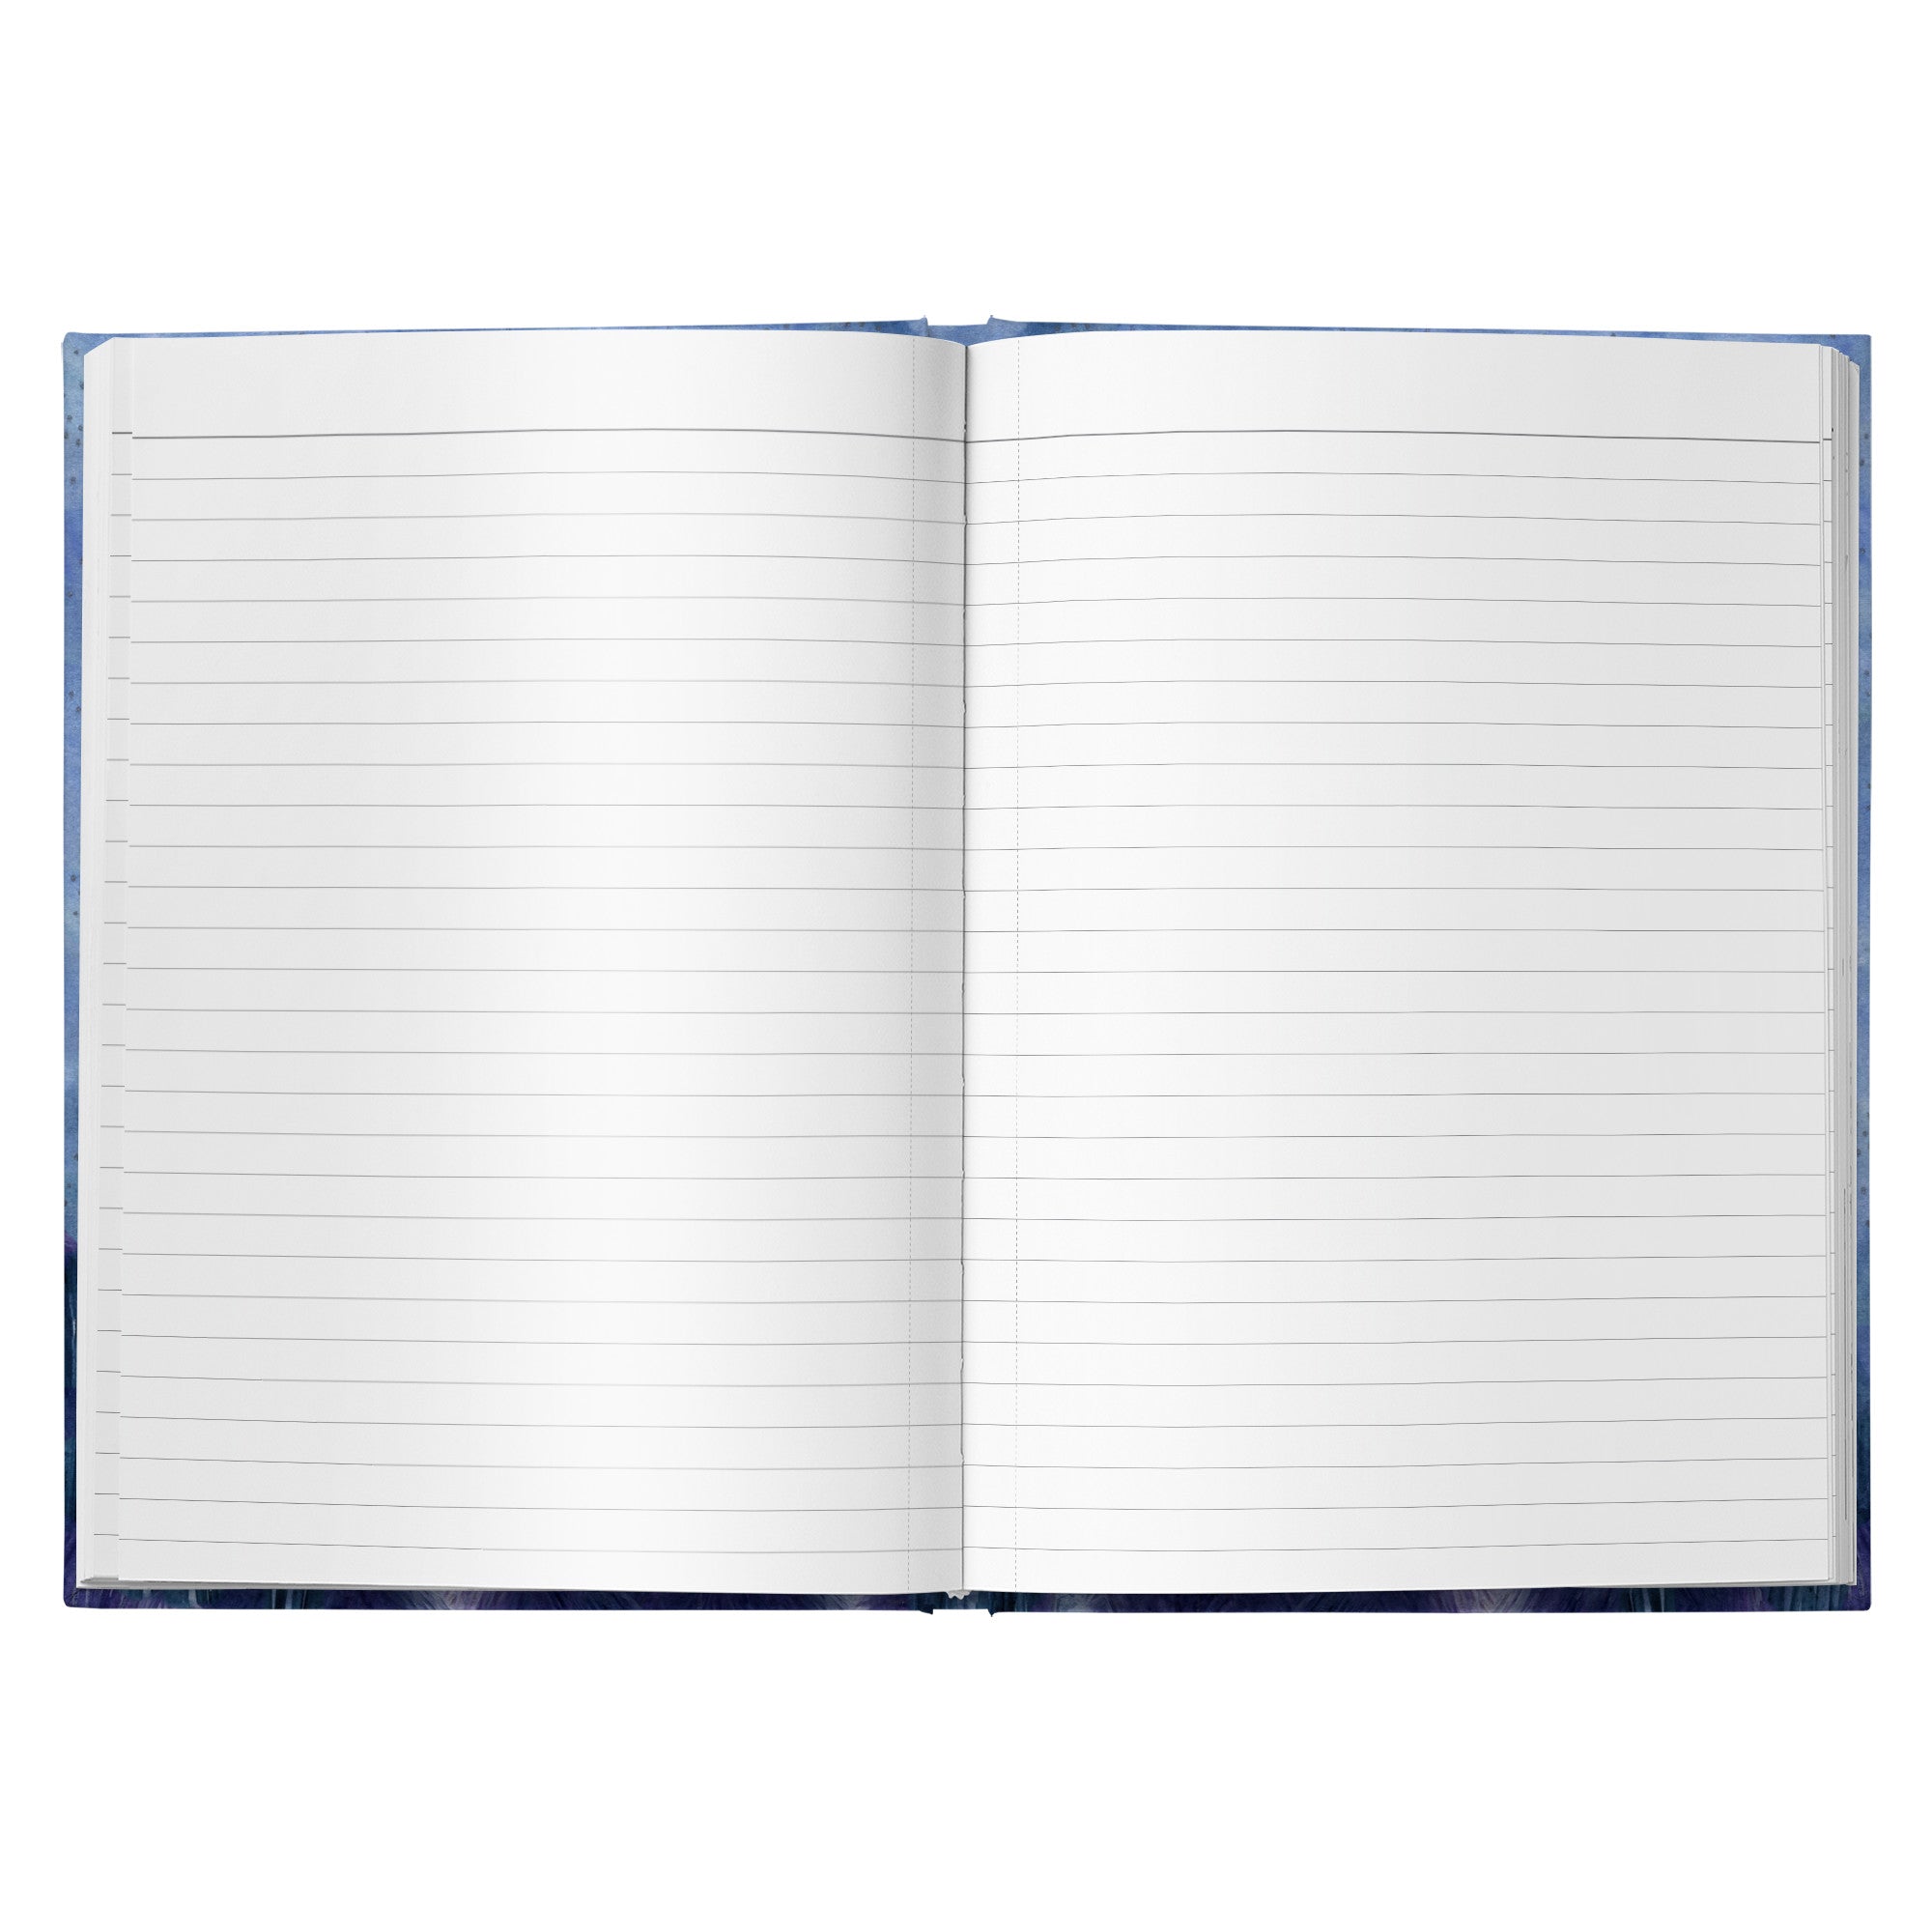 Open Celestial Bear Journal with lined pages displayed against a white background.